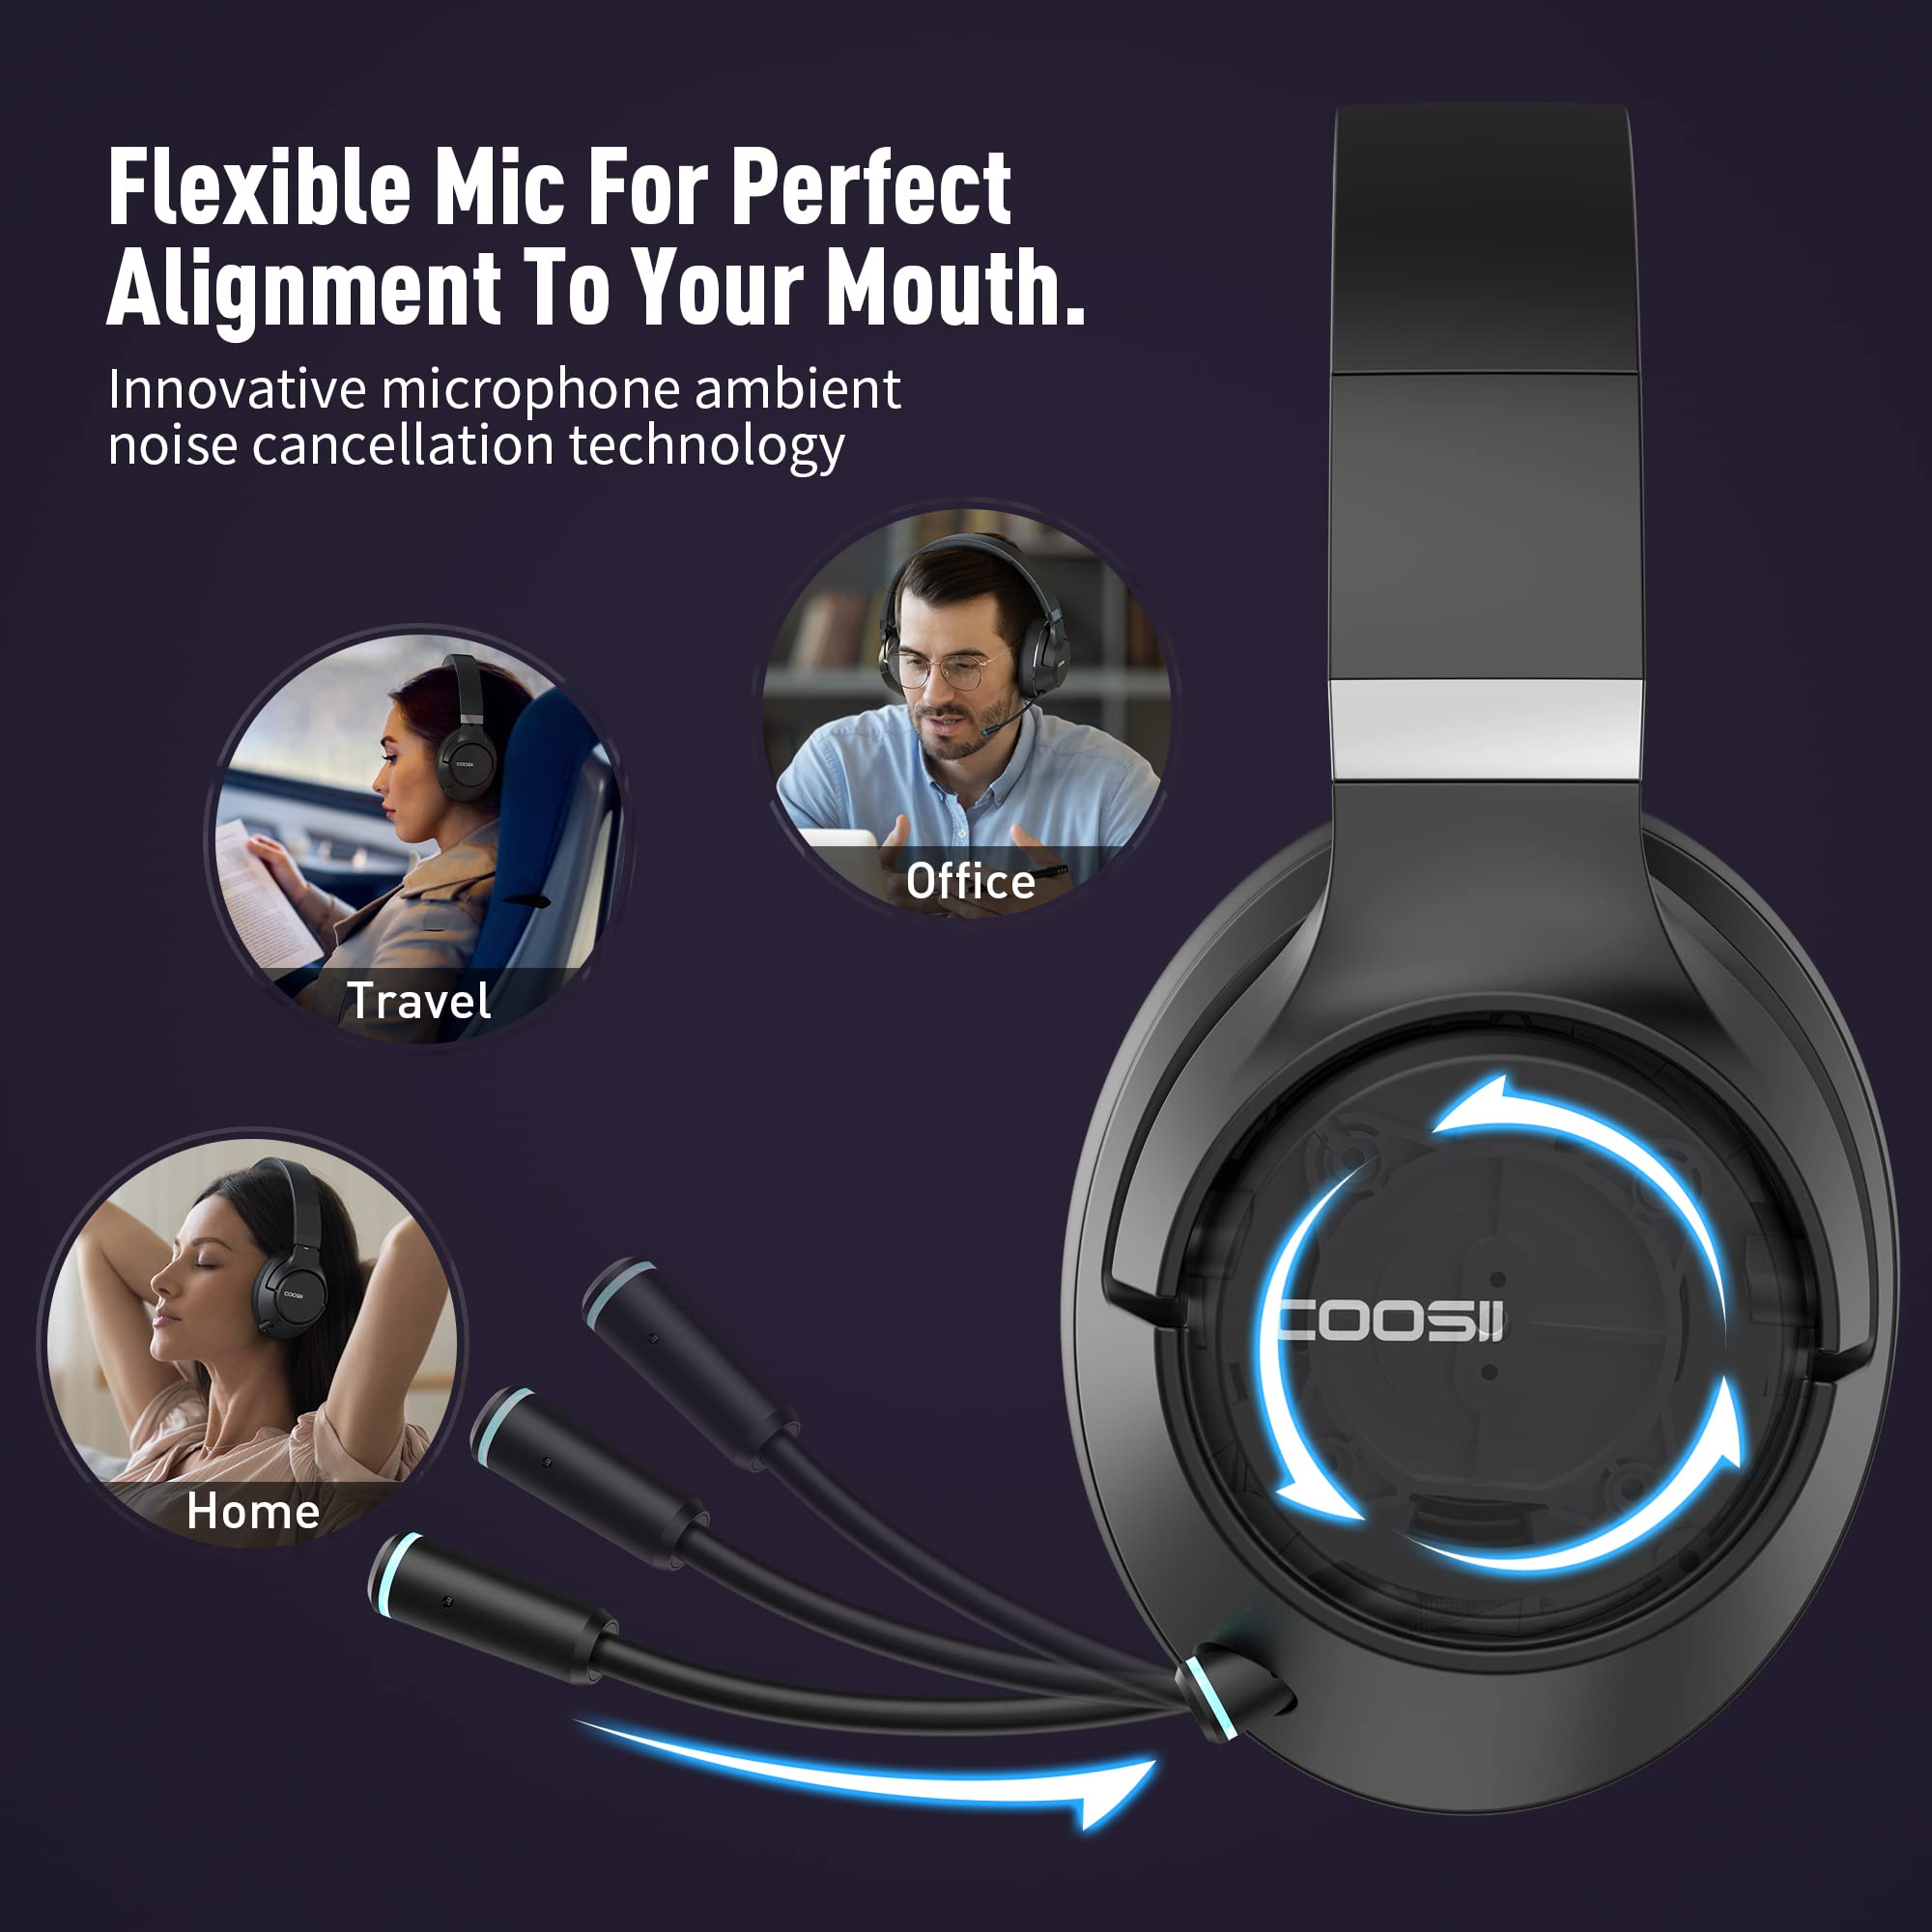 COOSII Wireless Headsets with Microphone for Gaming Study Meetings Conference, Bluetooth Headphone Foldable Over Ear Soft 40H with Retractable Mic, USB Dongle for PS5 PS4 PC Computer Cellphone Laptop